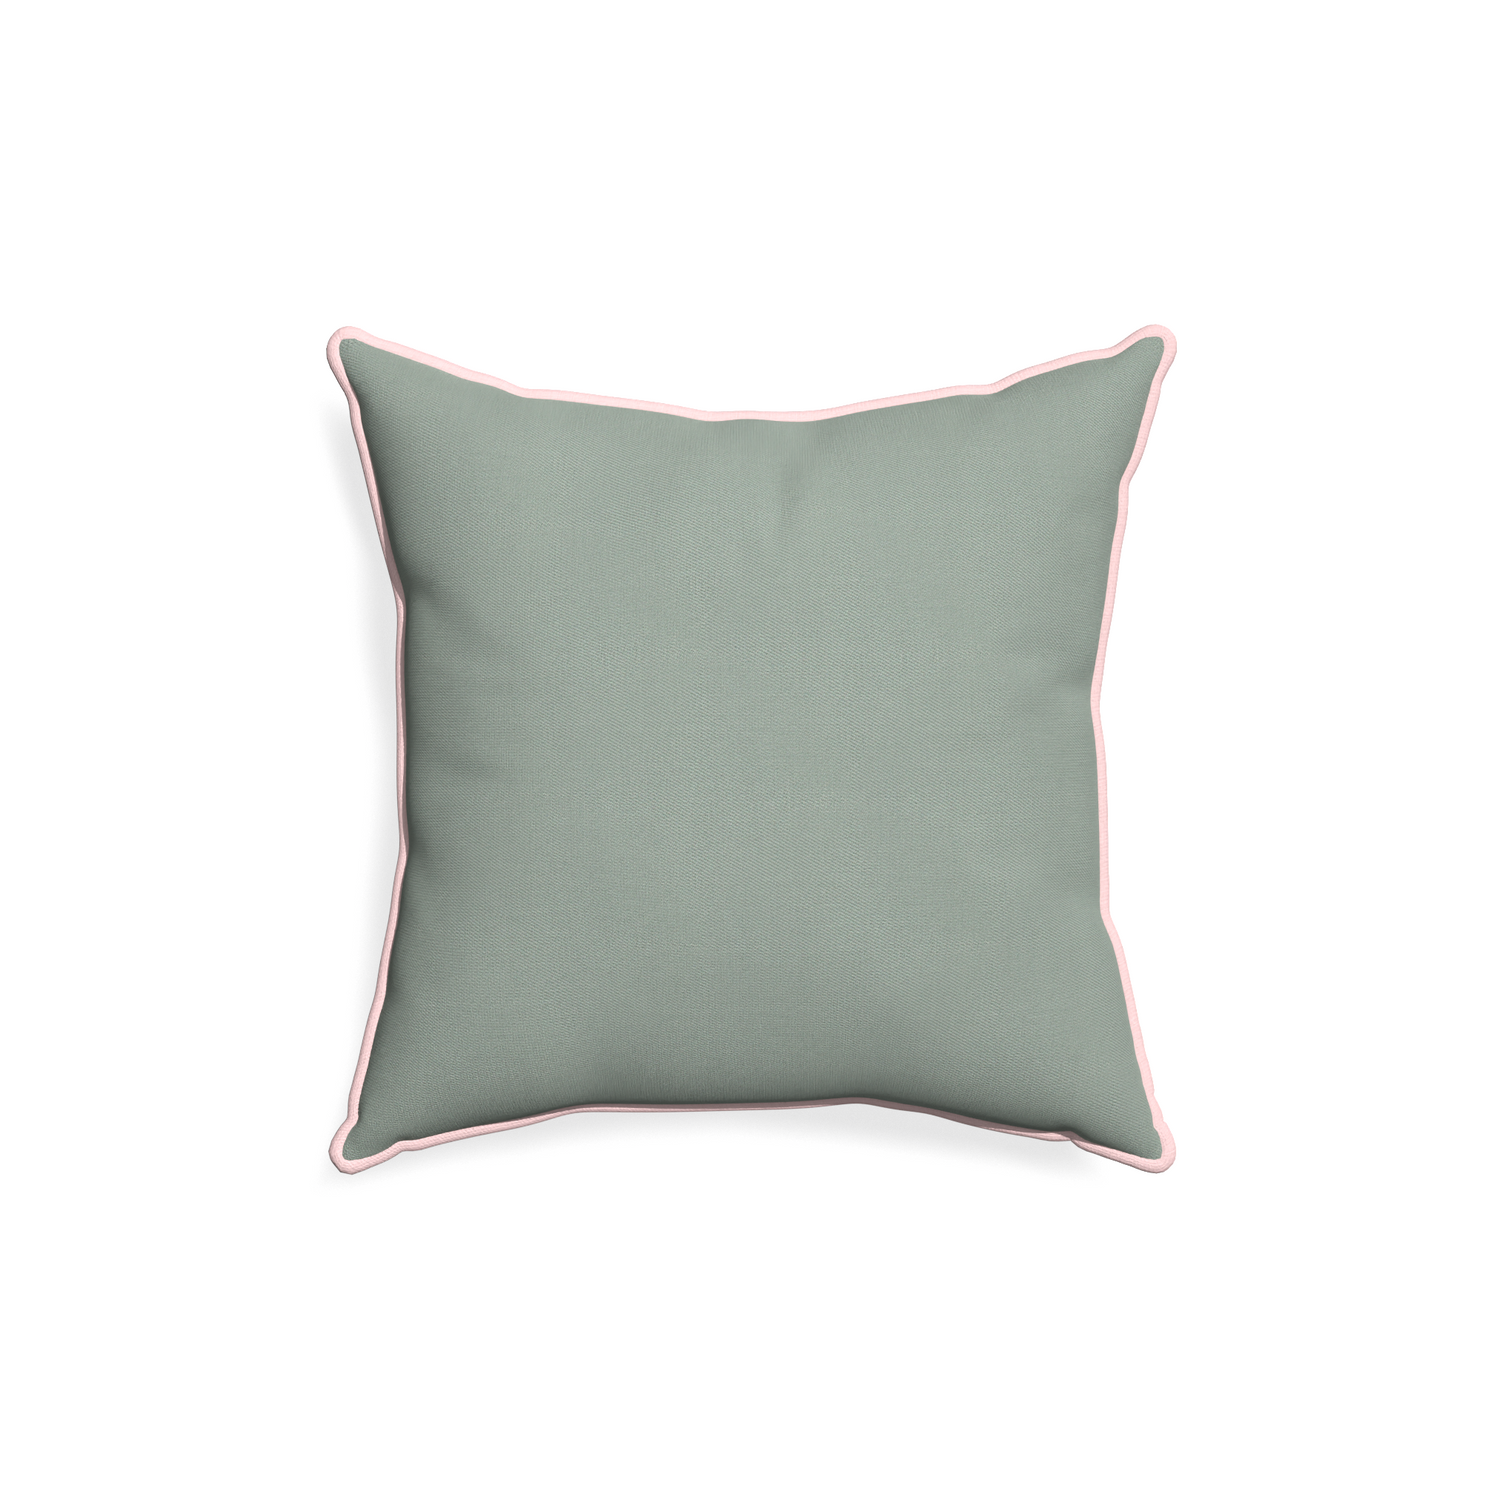 18-square sage custom sage green cottonpillow with petal piping on white background